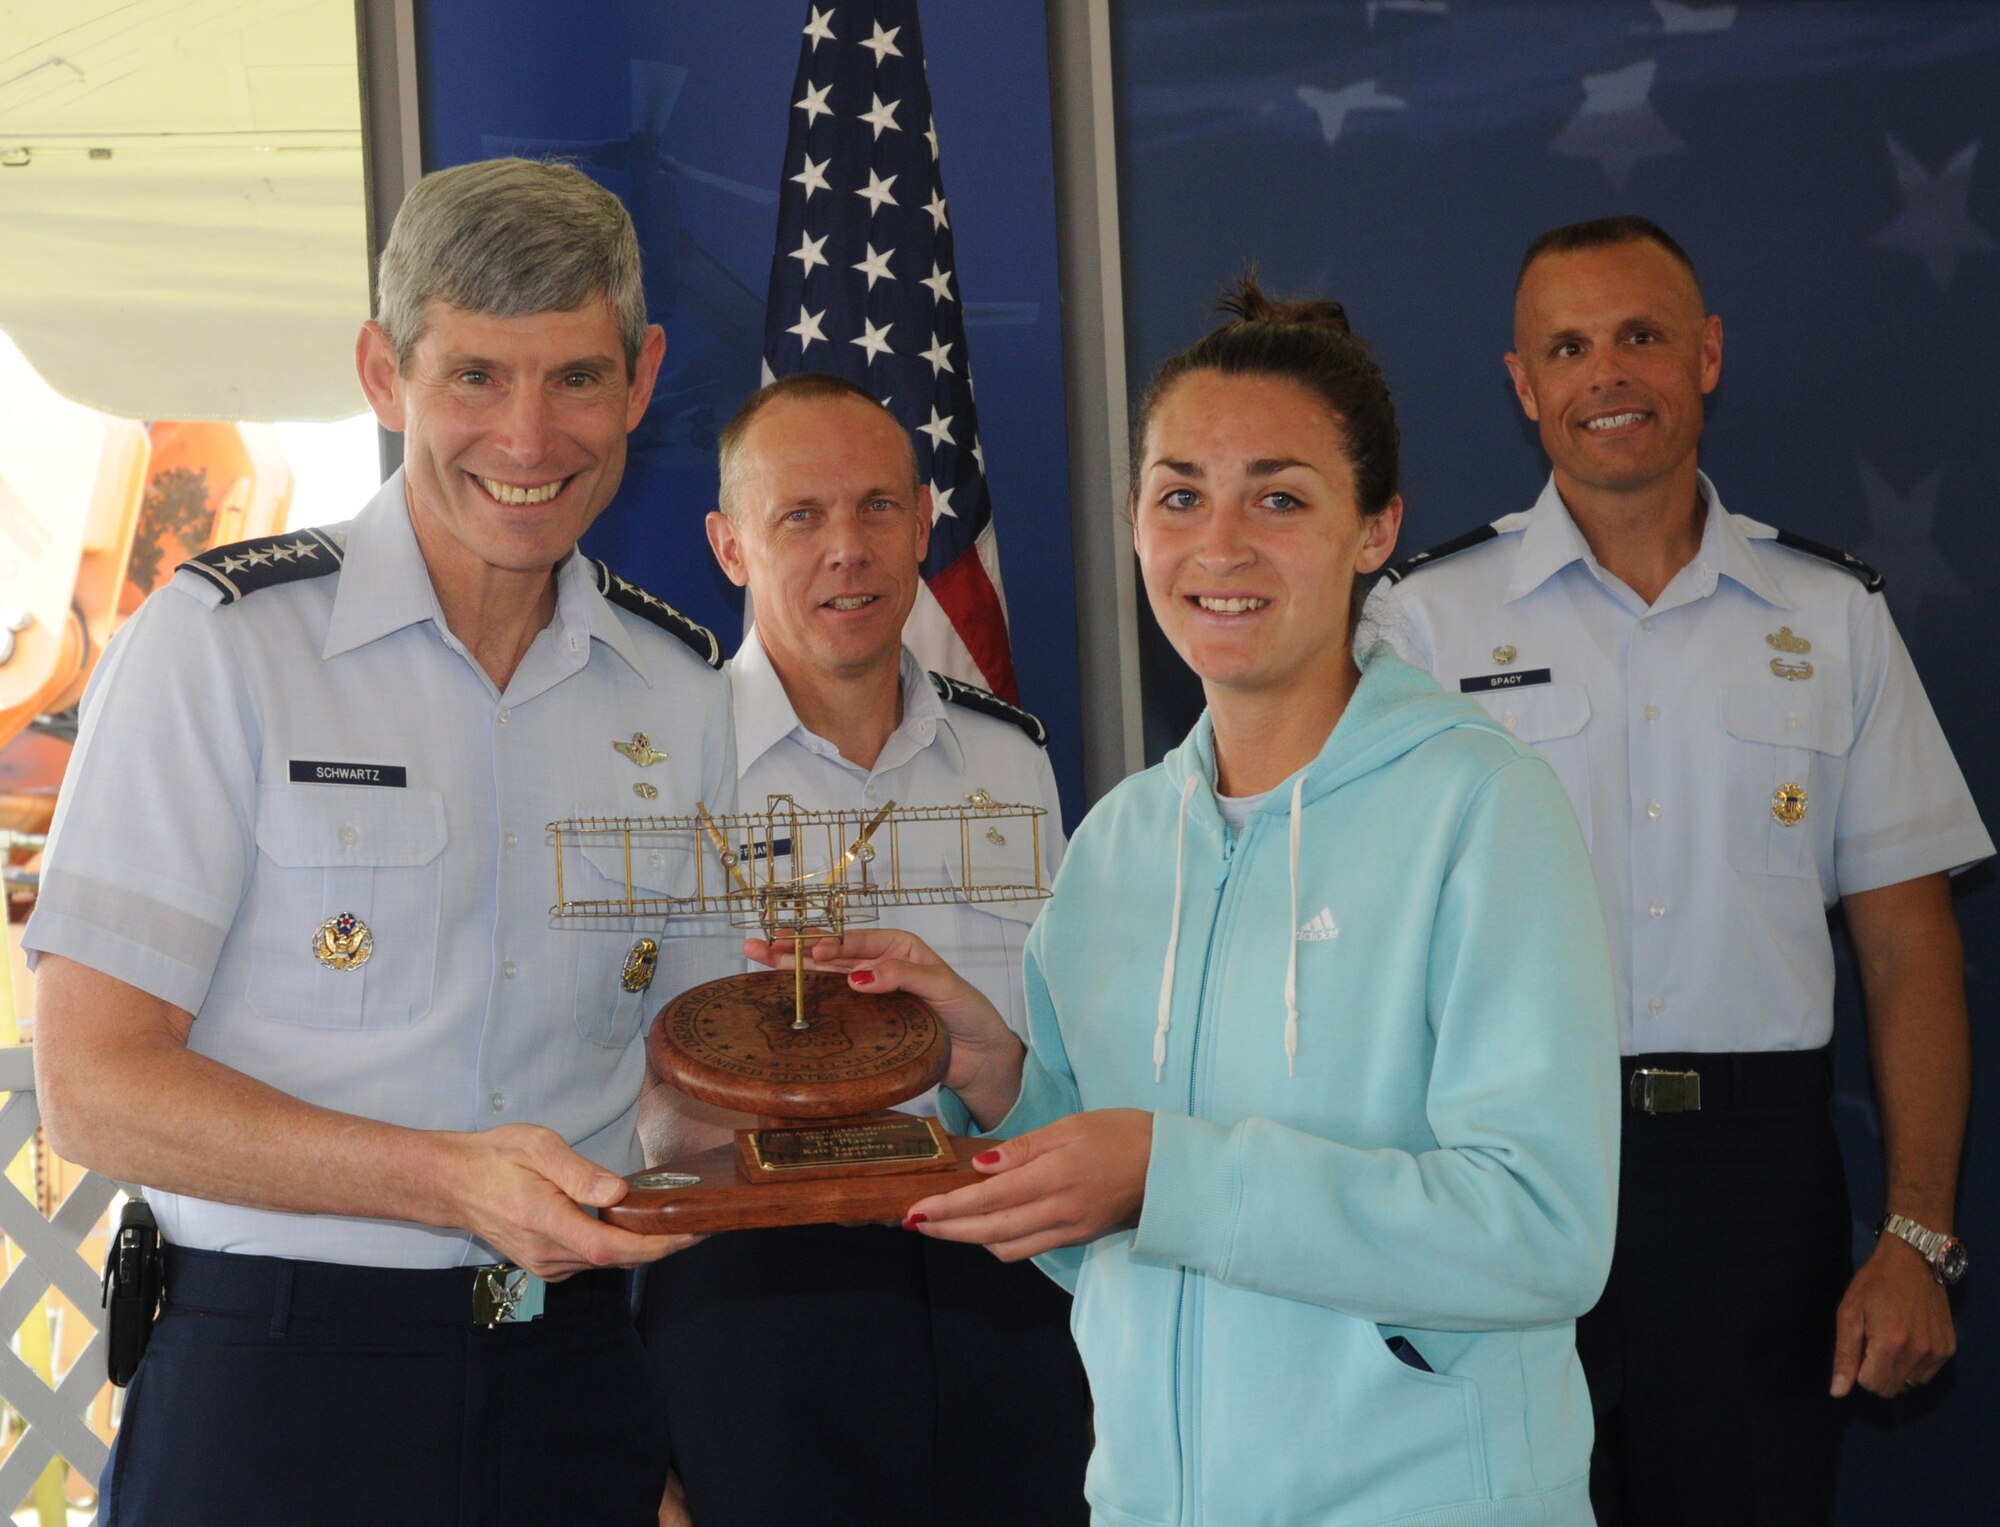 Gen. Norton Schwartz, Air Force Chief of Staff, gives a trophy to Kate Papenberg, the female winner of the full marathon.  (US Air Force photo by Al Bright)